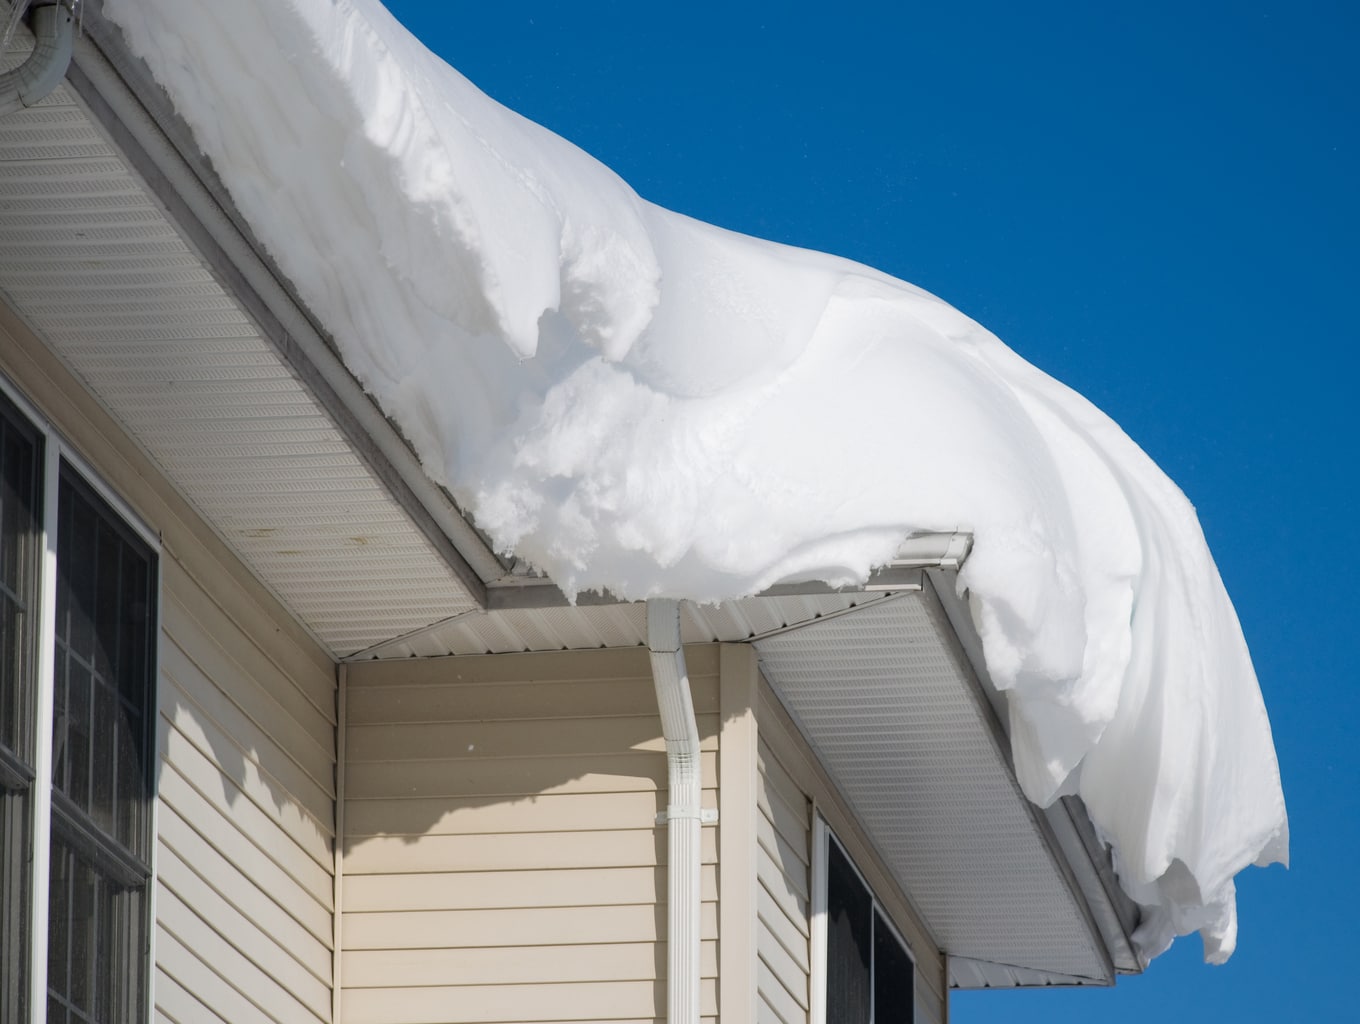 Prevent Home Roof Damage from Heavy Snow and Ice – DISASTERSAFETY.ORG